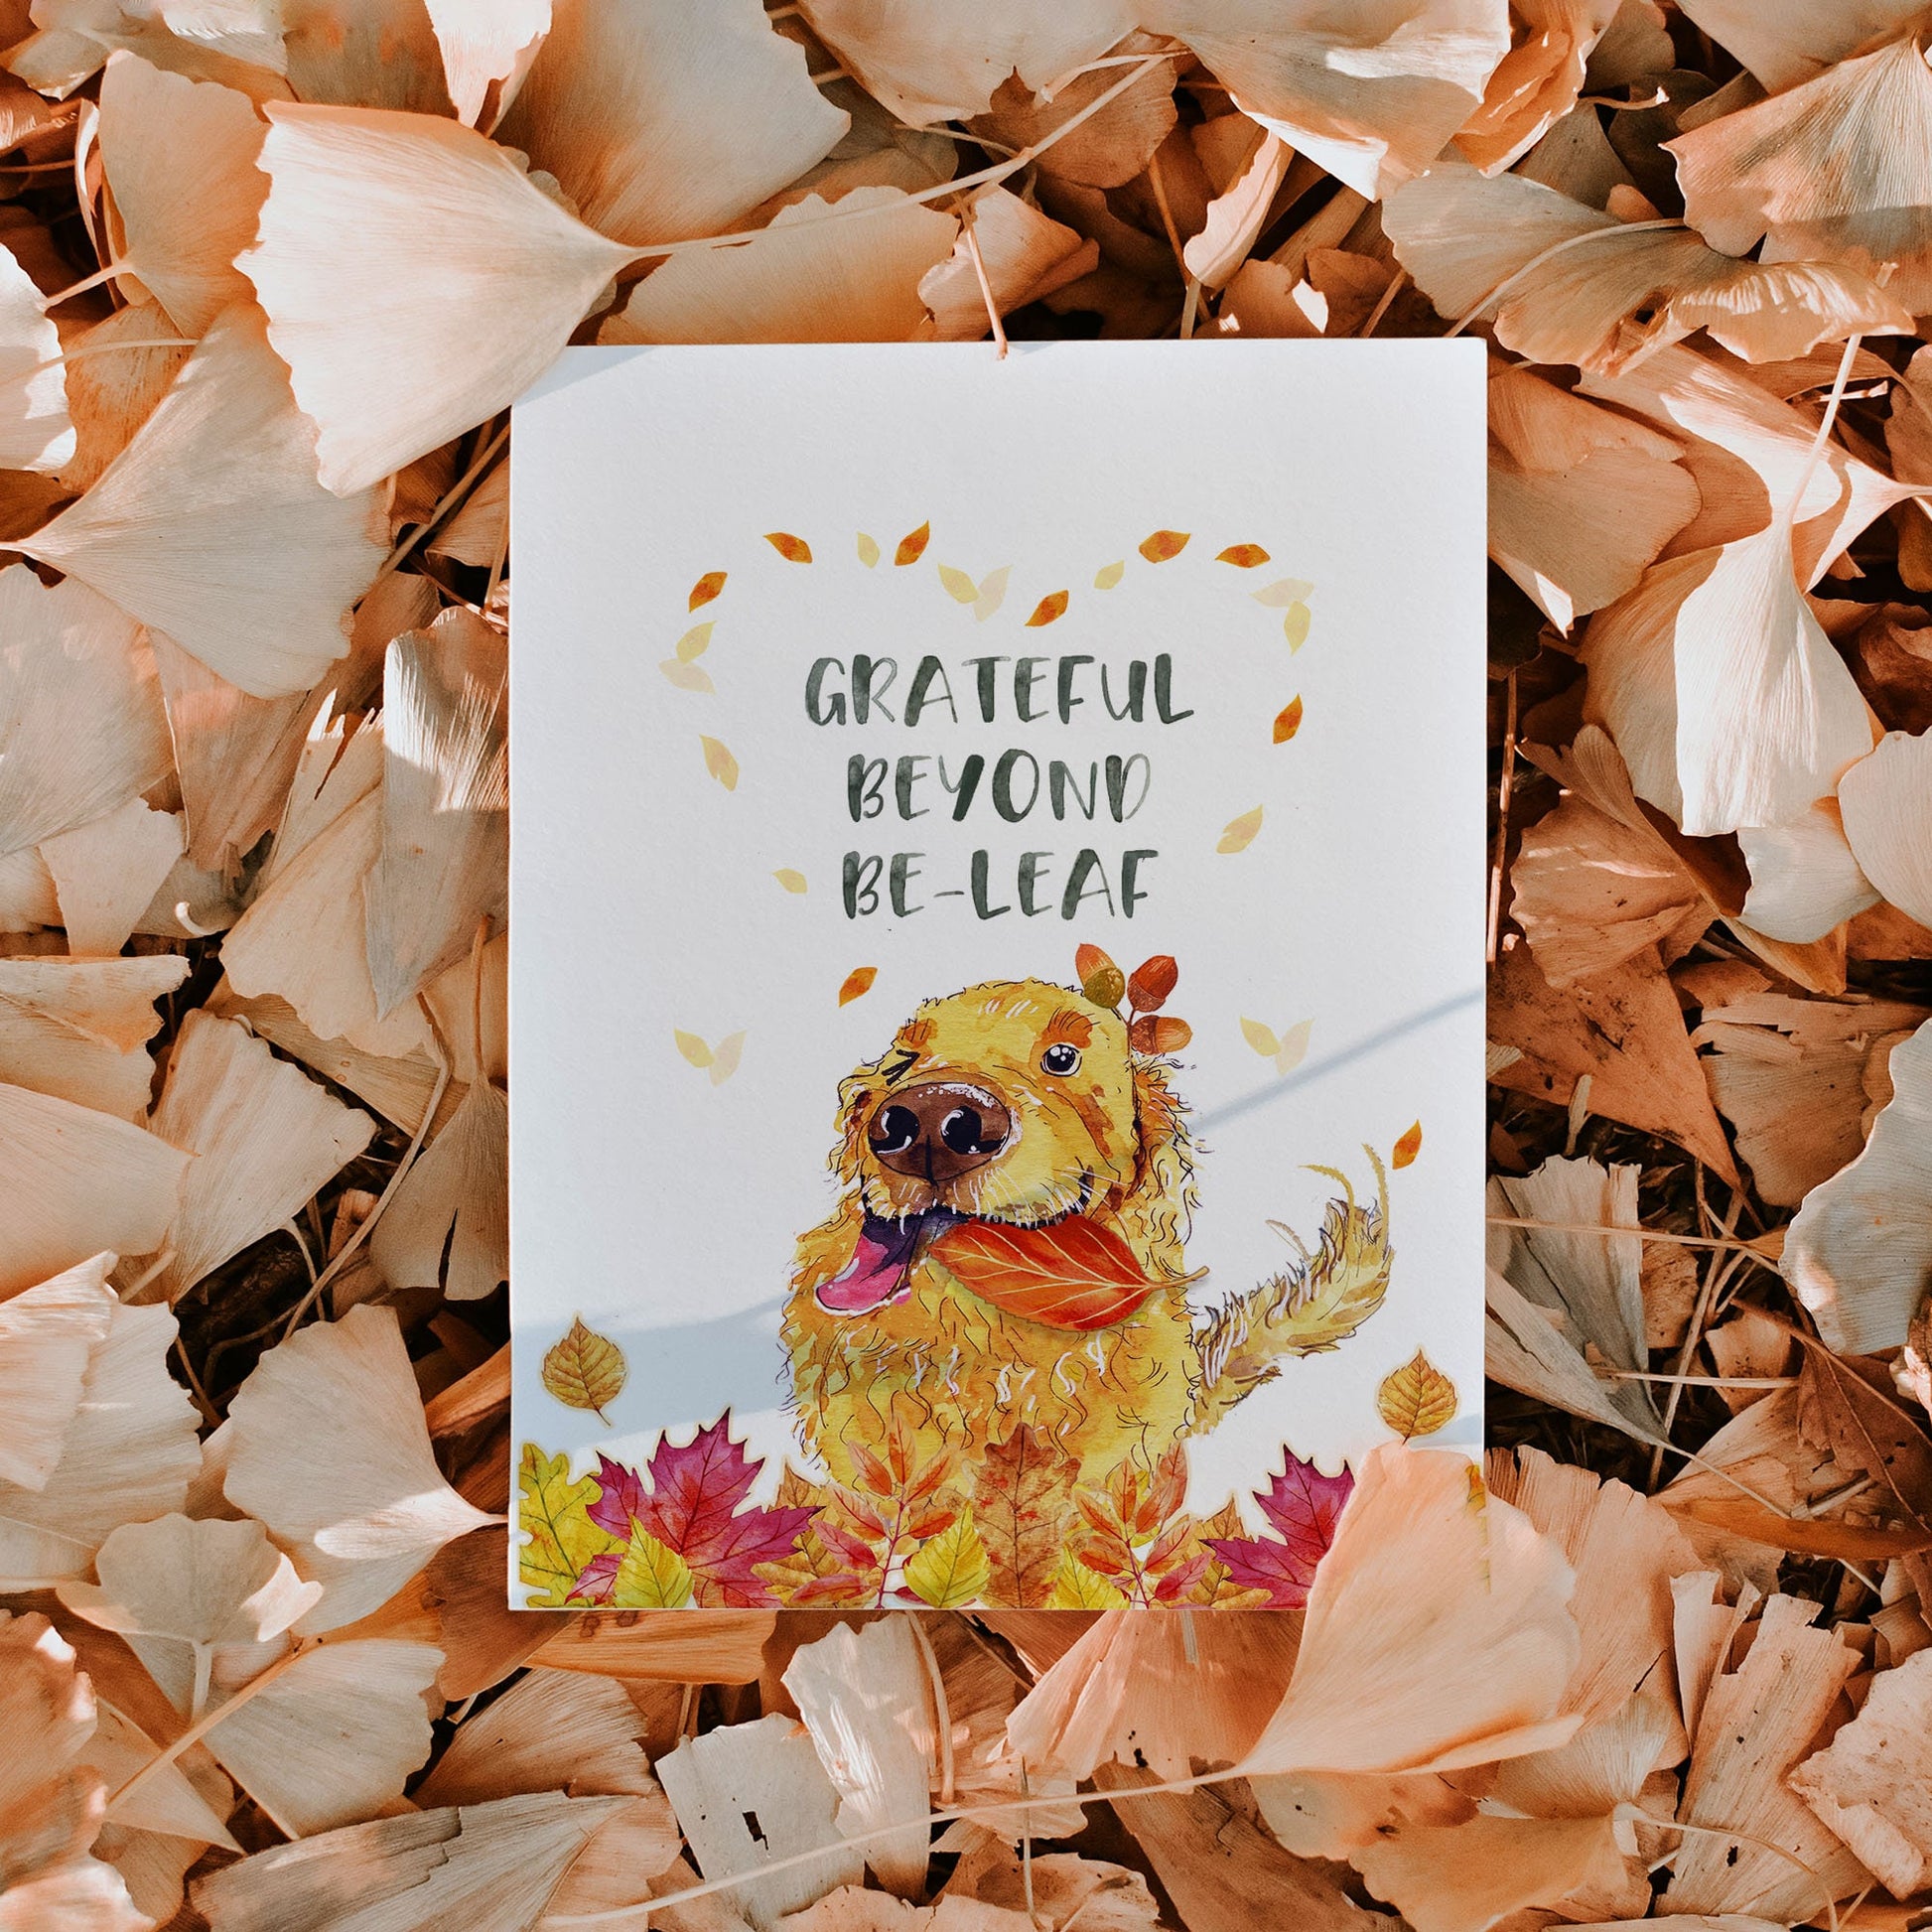 Grateful Golden Retriever Dog Thanksgiving Card For Friends - Thank You Cards - Autumn Holiday Seasons Greetings